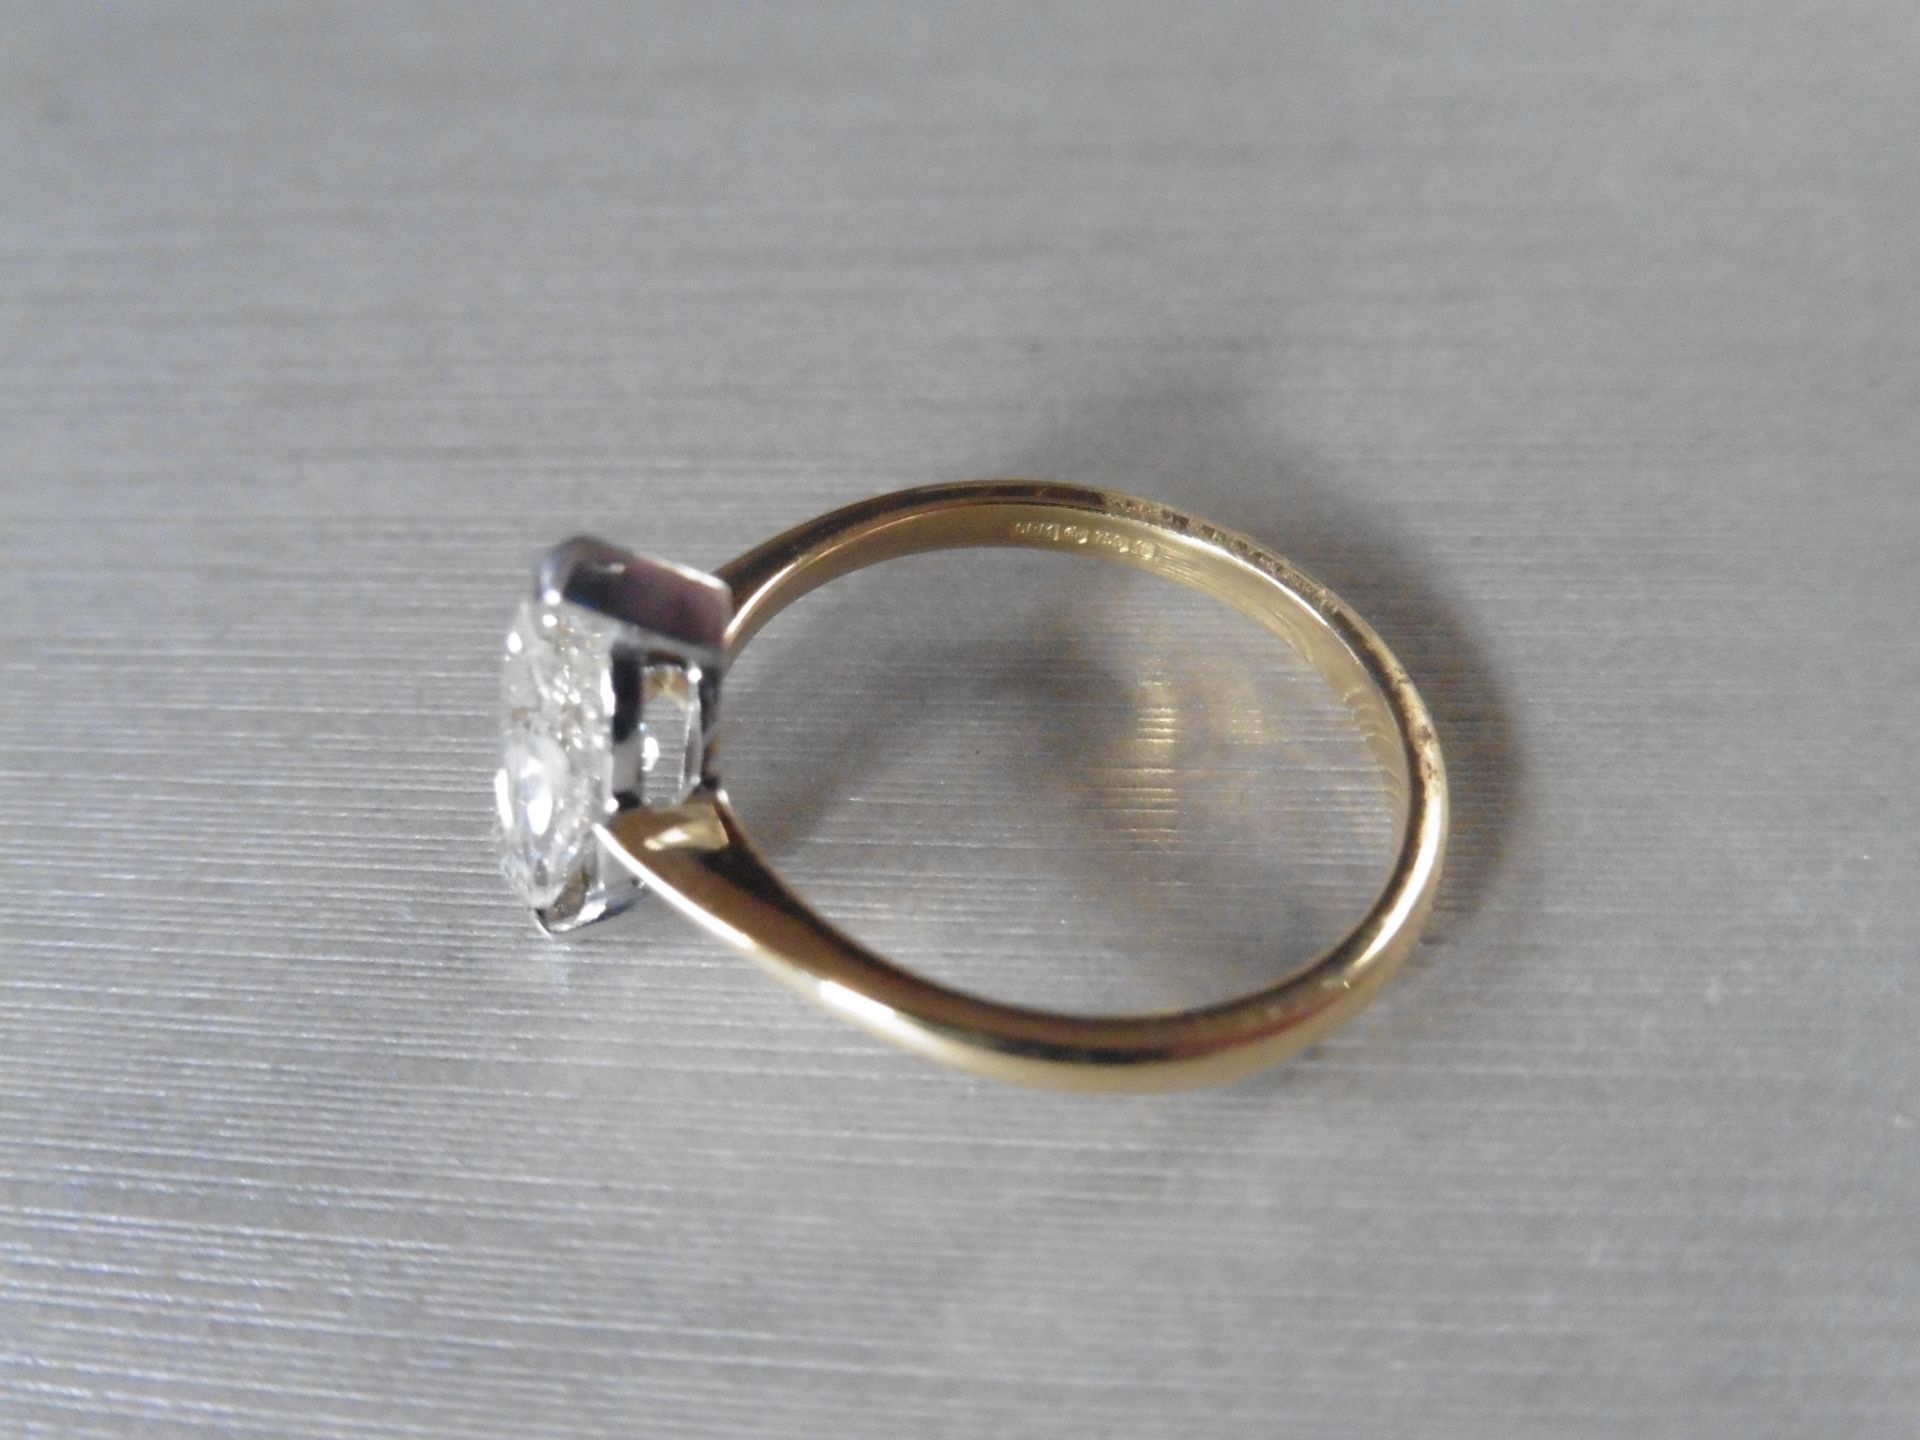 1.51ct marquise cut diamond ring. H colour and Si2 clarity. Secured in a 2 claw white gold setting - Image 3 of 7